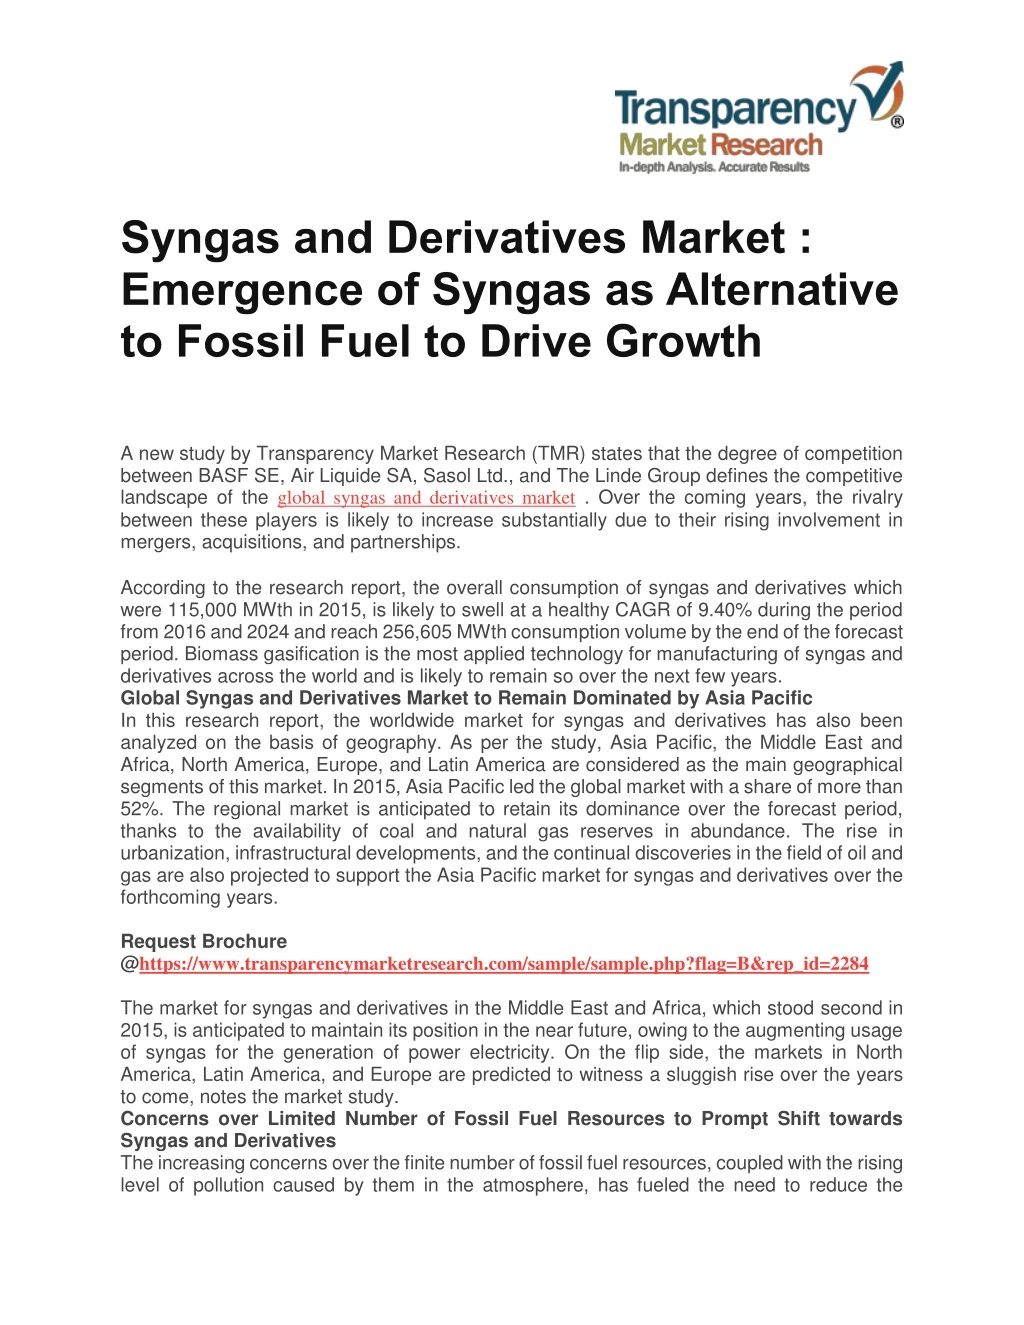 syngas and derivatives market emergence of syngas